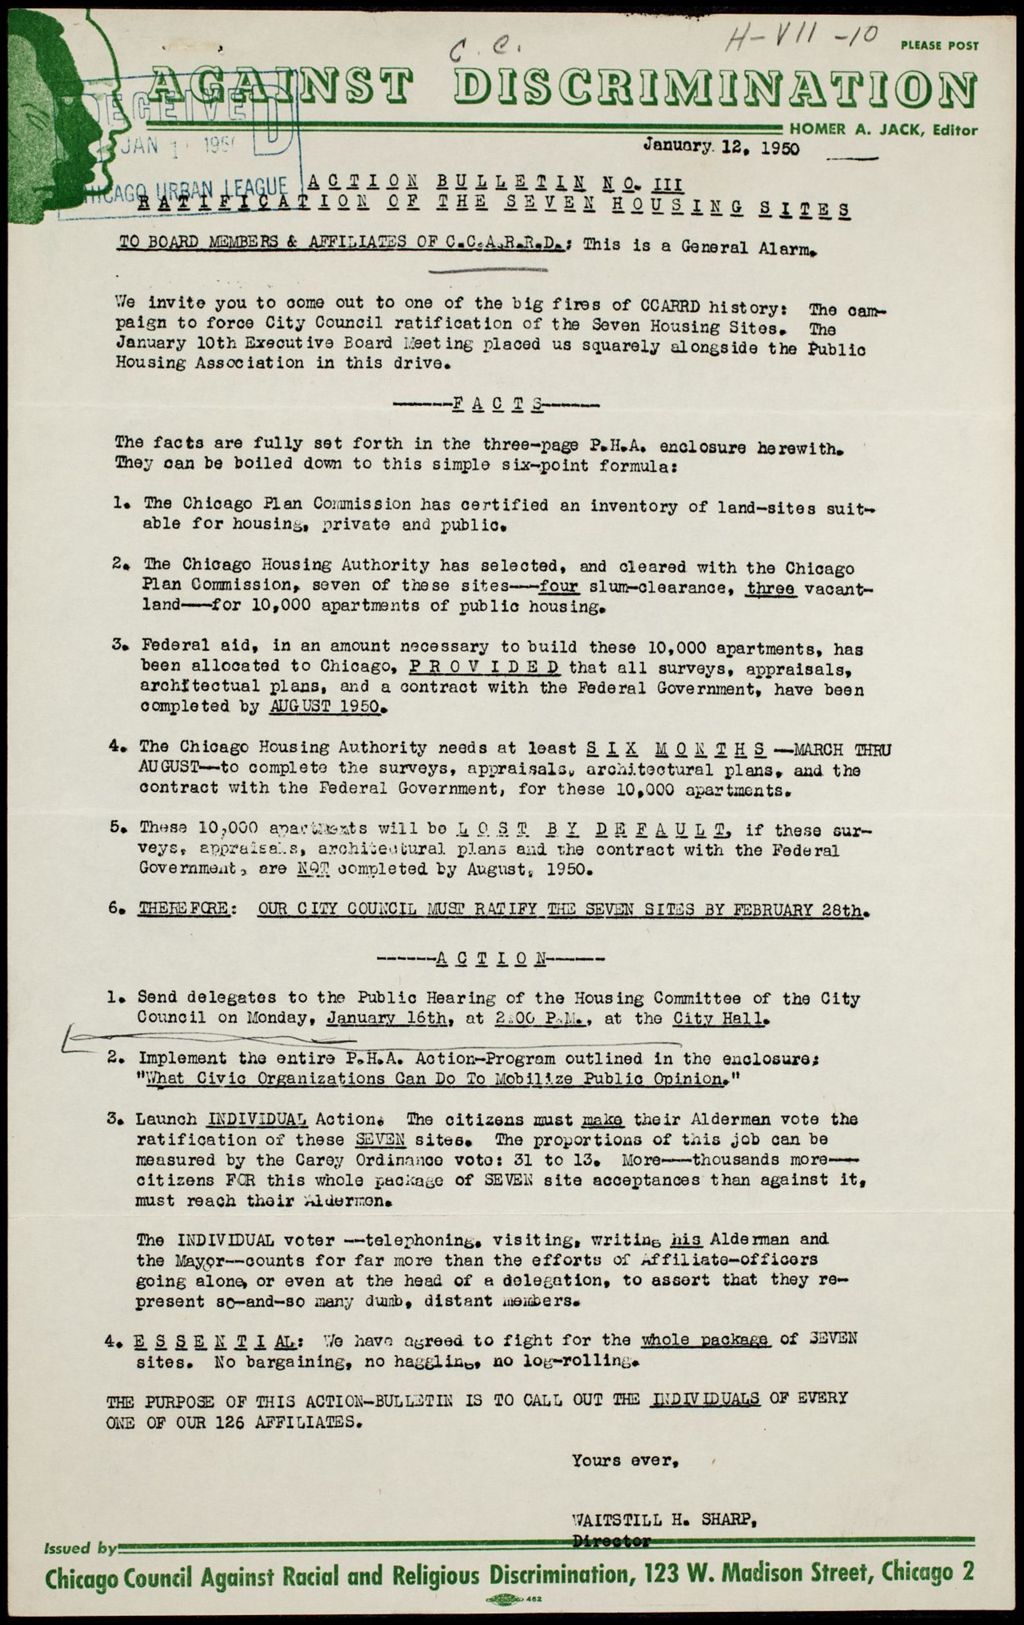 Miniature of Chicago Council Against Racial and Religious Discrimination bulletins, 1950-1953 (Folder I-2784)